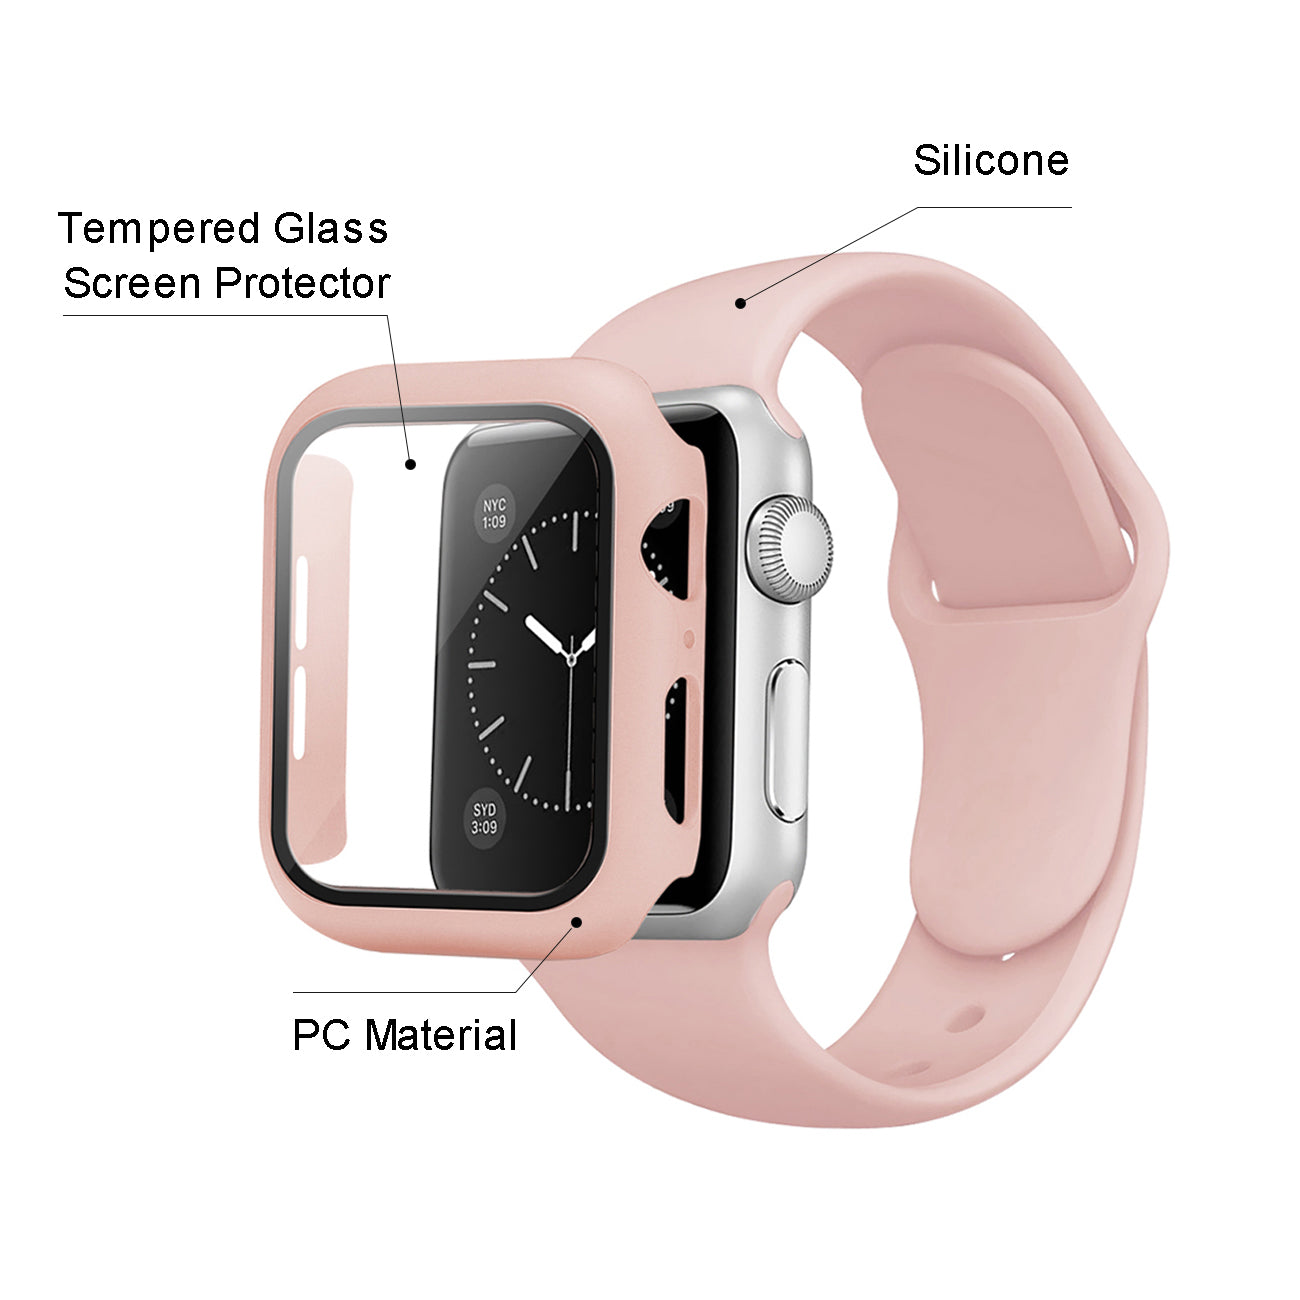 Watch Case PC With Glass Screen Protector, Silicone Watch Band Apple Watch 38mm Pink Color